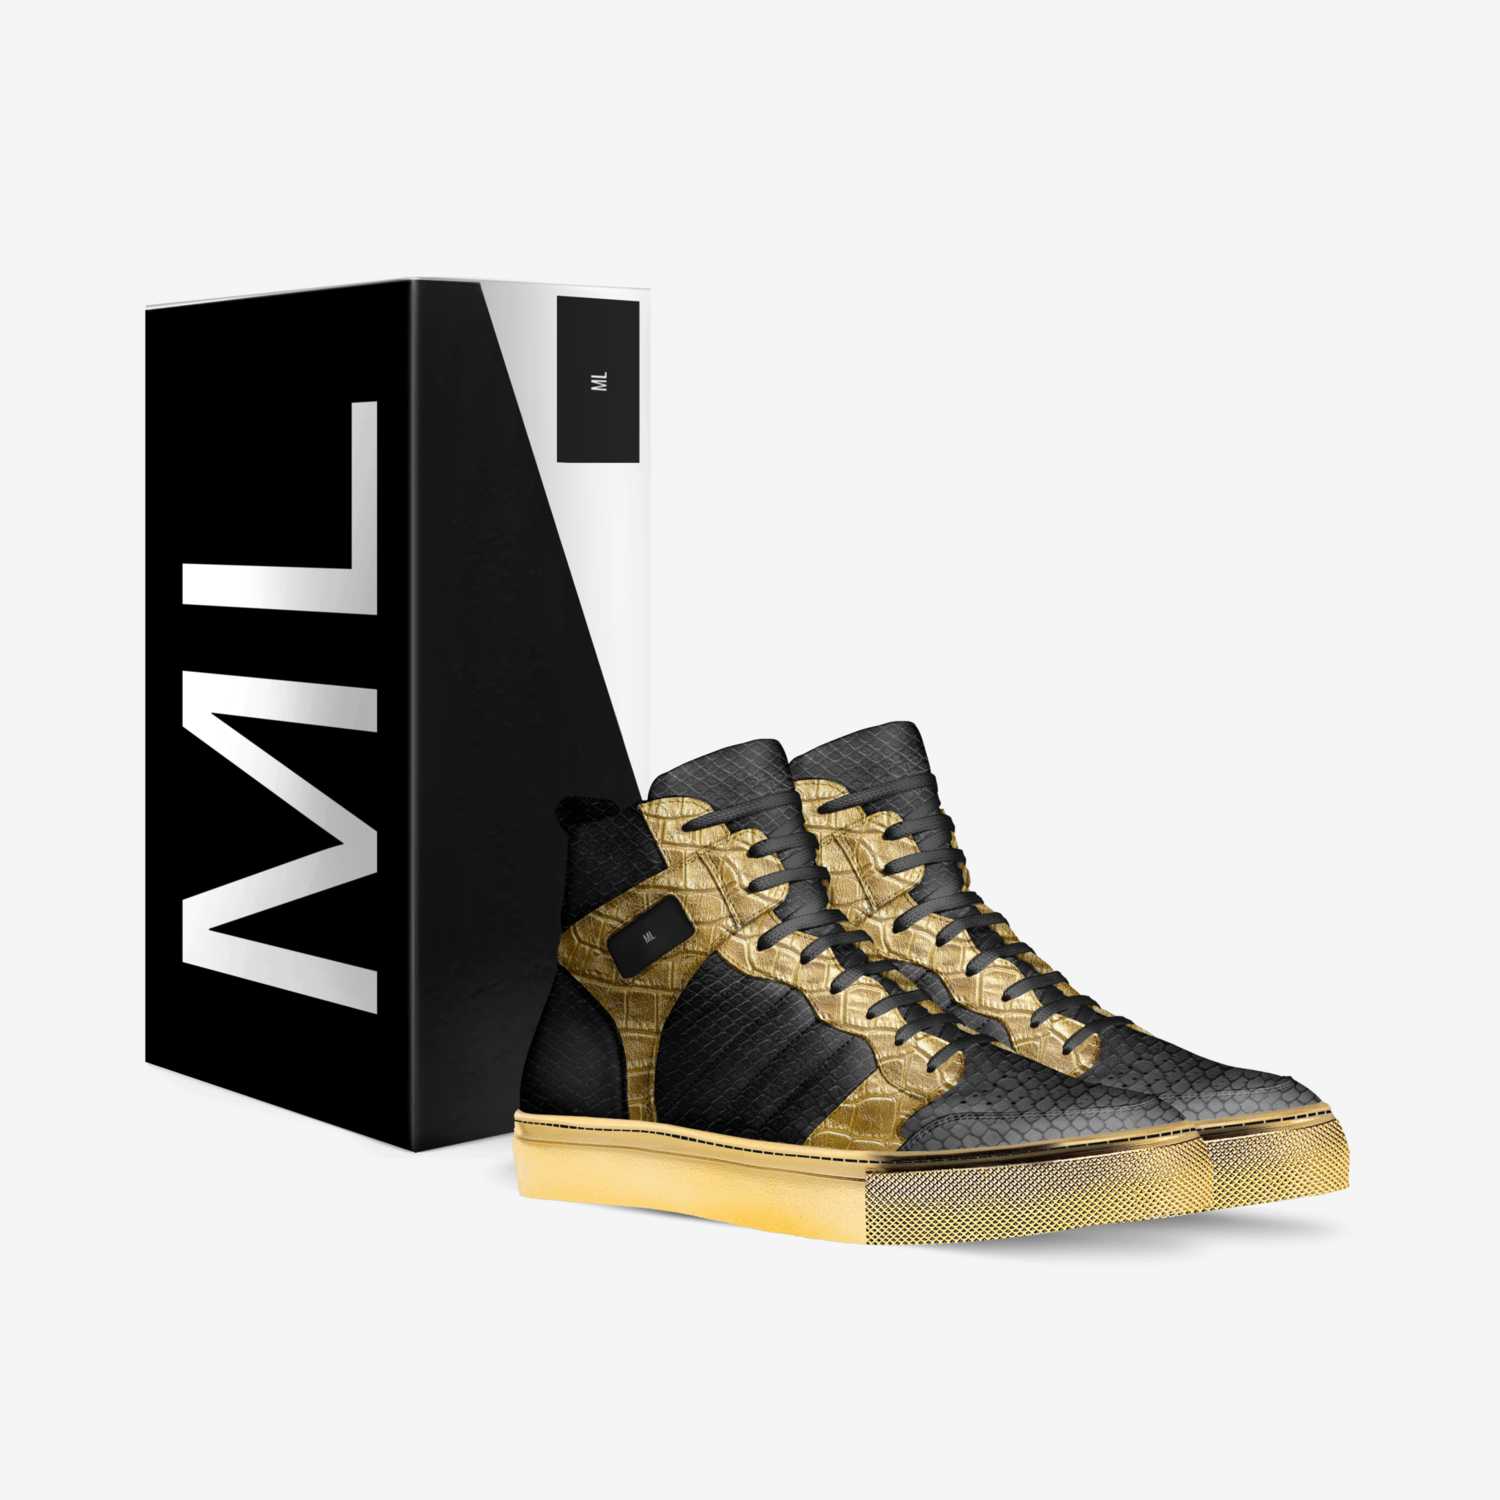 ML custom made in Italy shoes by Joshua Amell | Box view